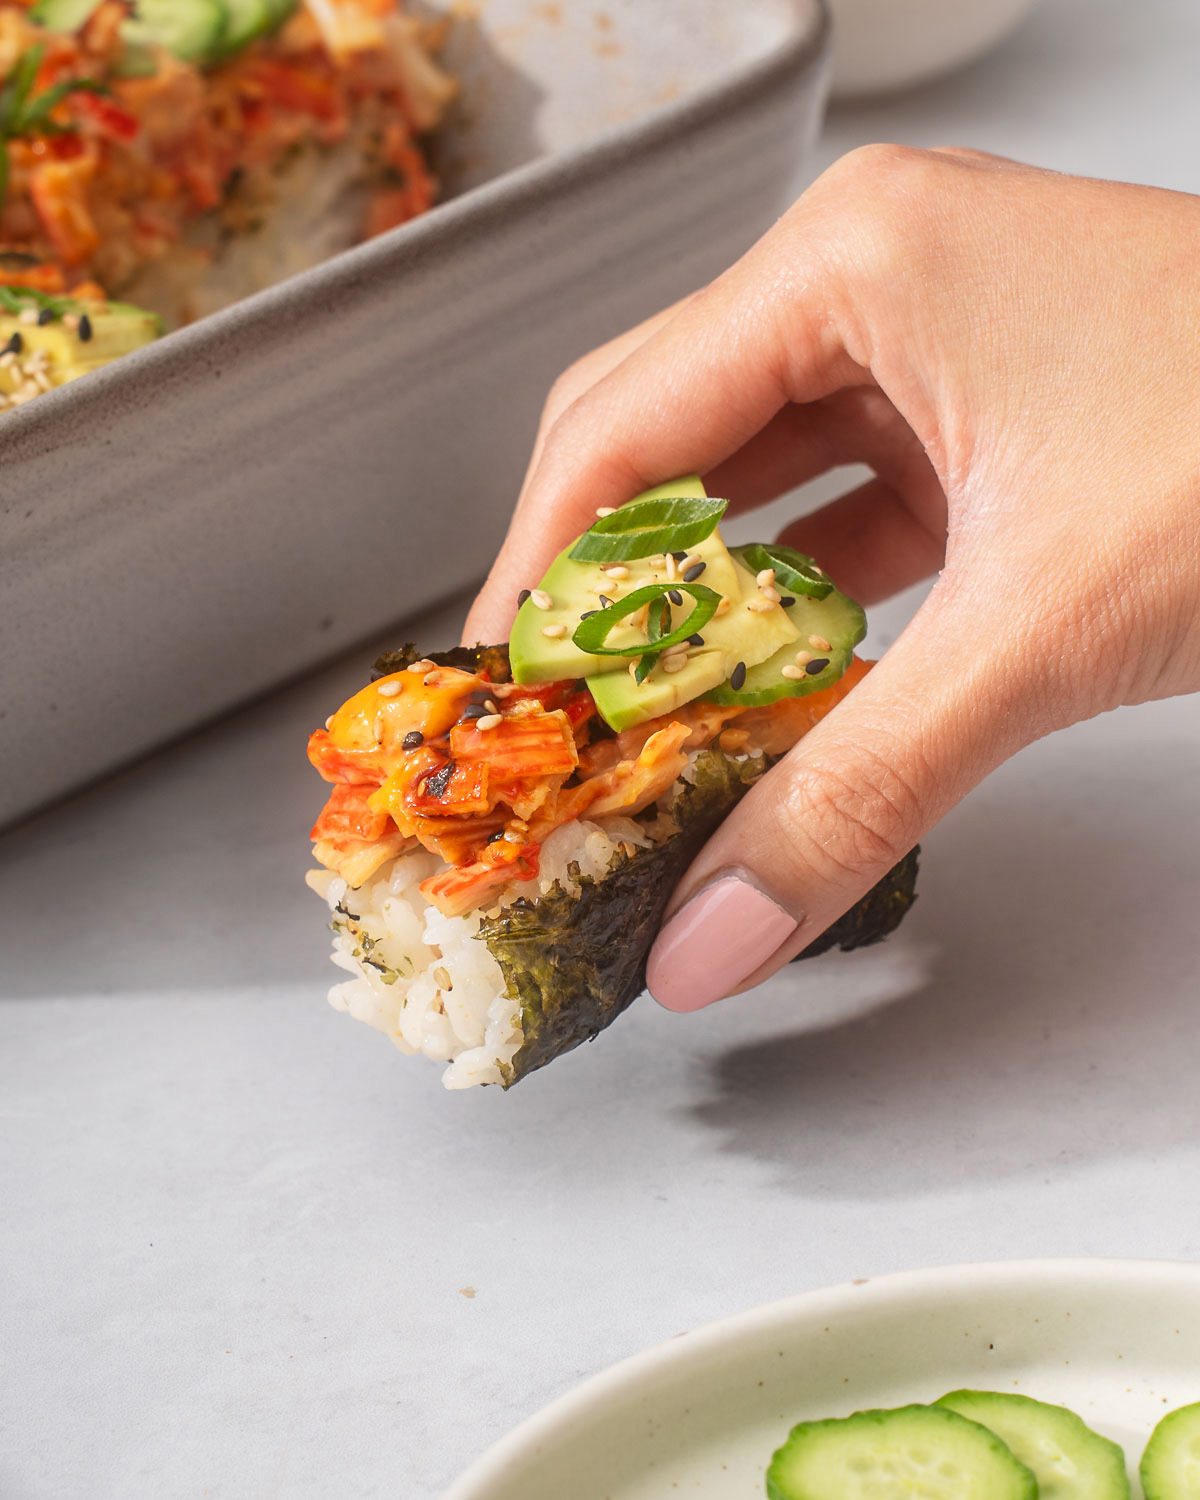 Holding a slice of sushi bake in a seaweed snack.